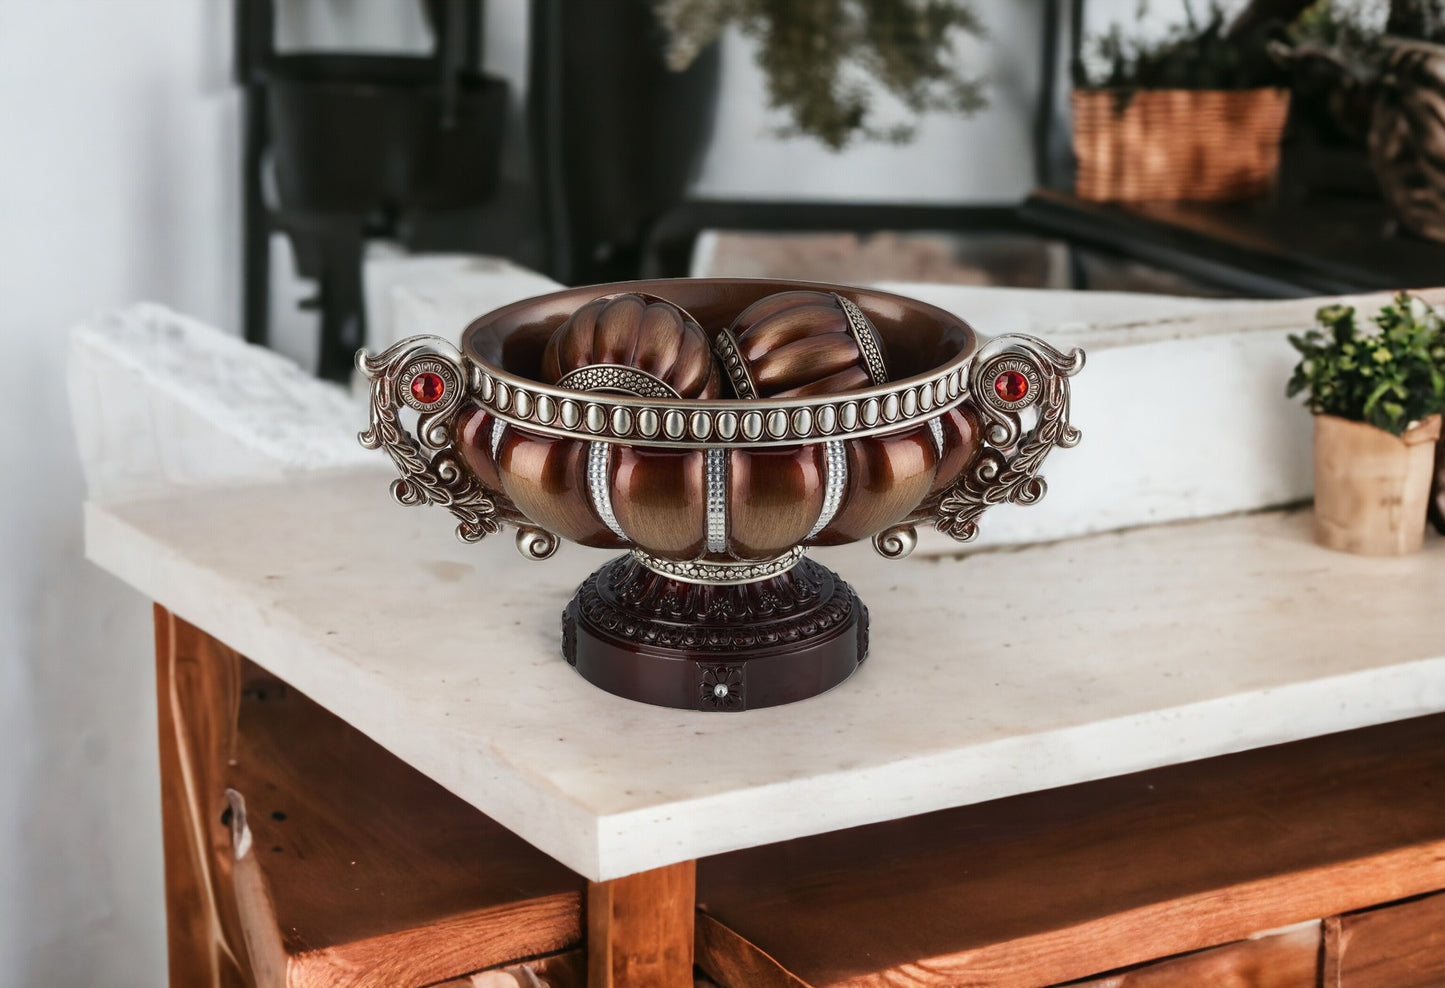 9" Reddish Bronze And Silver Polyresin Decorative Bowl With Orbs